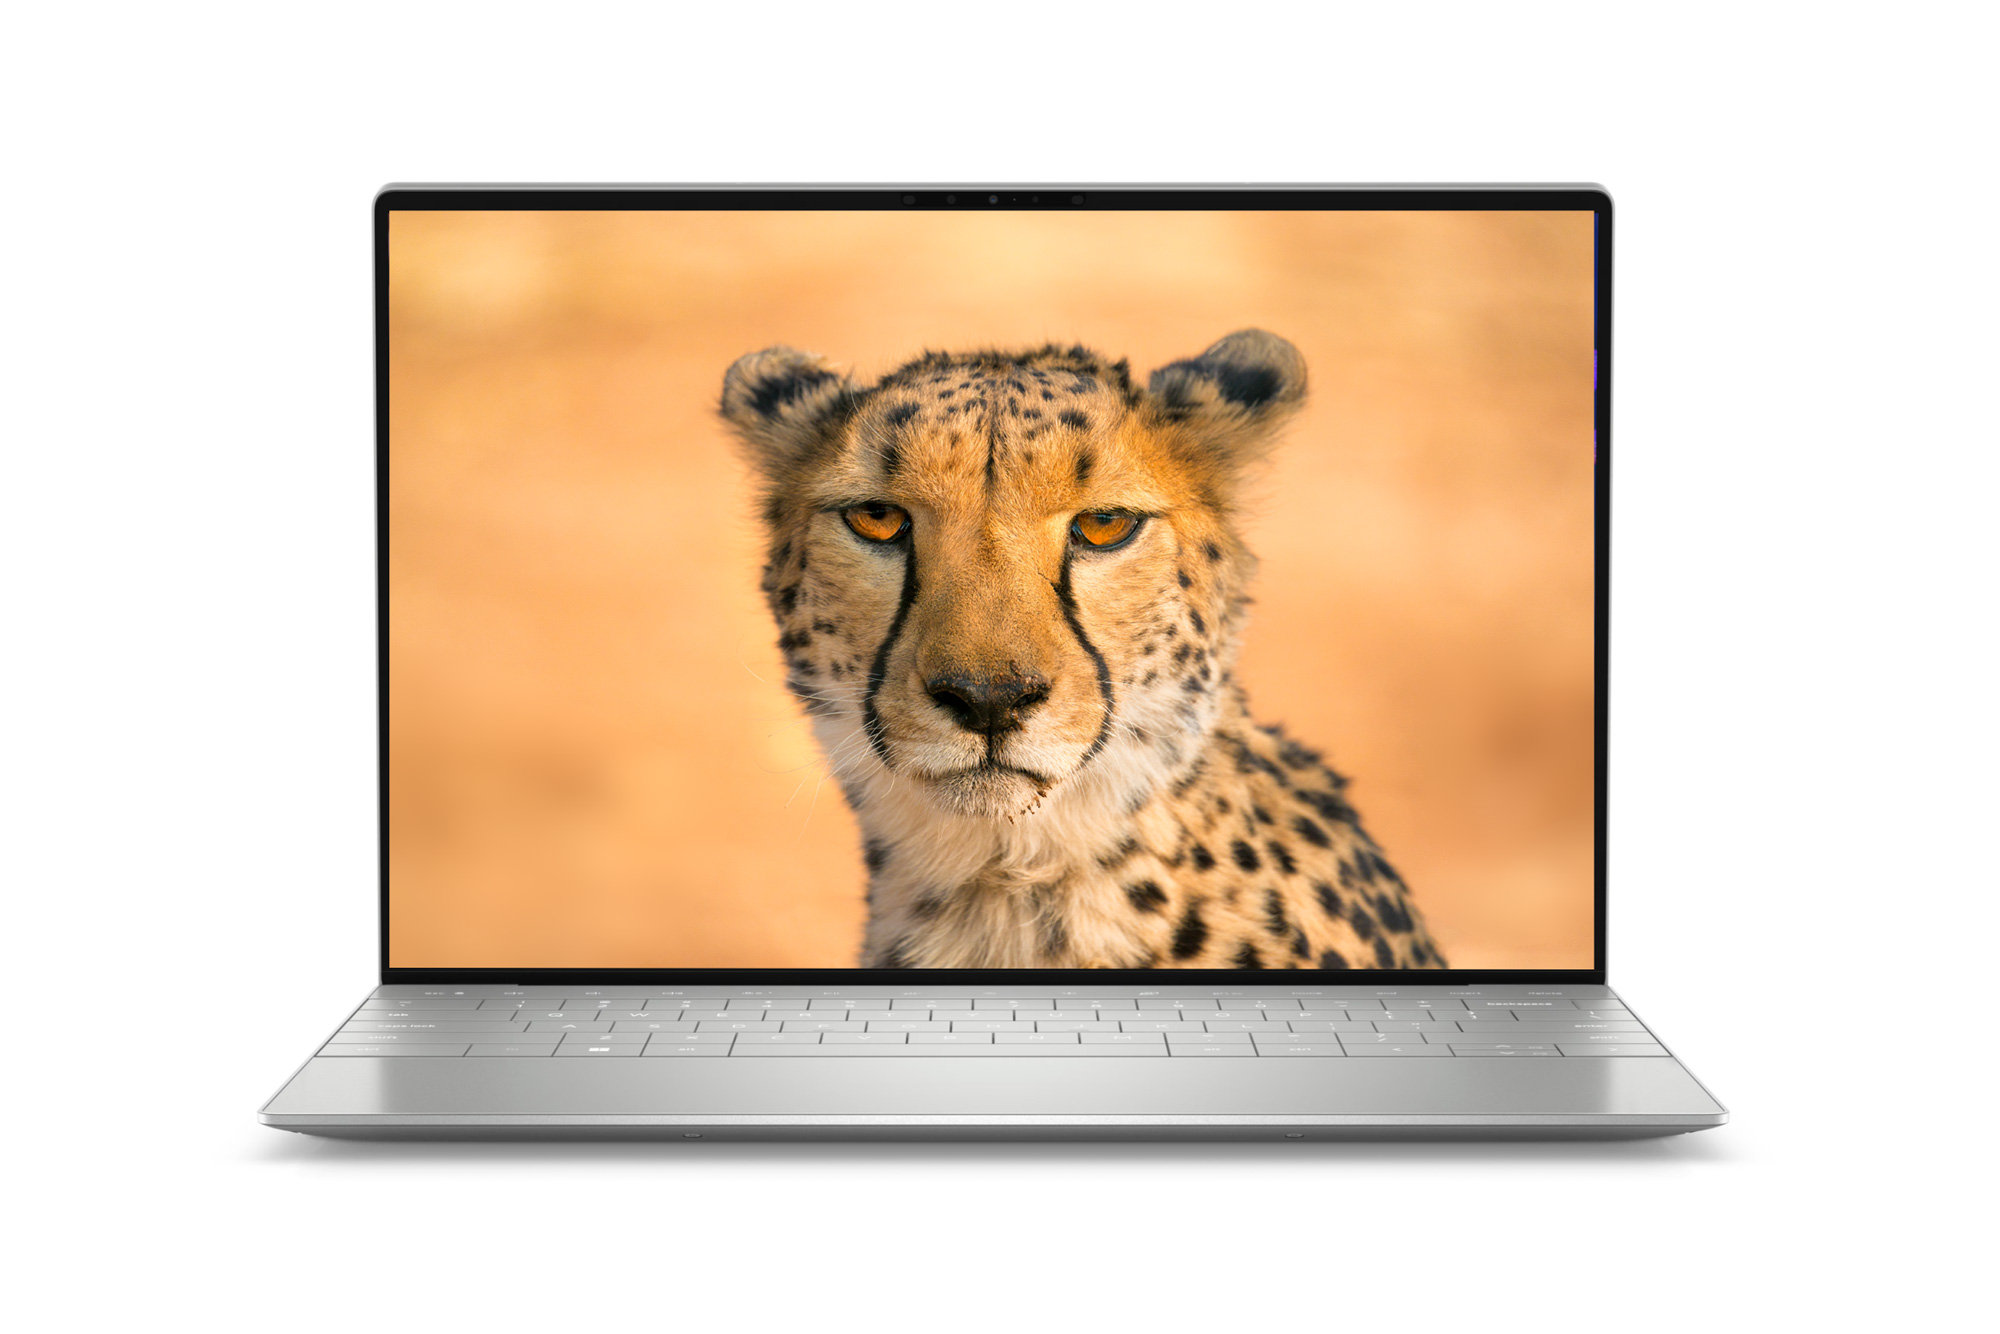 Dell XPS 13 Plus - The Best Ultra Portable Laptop Currently Out